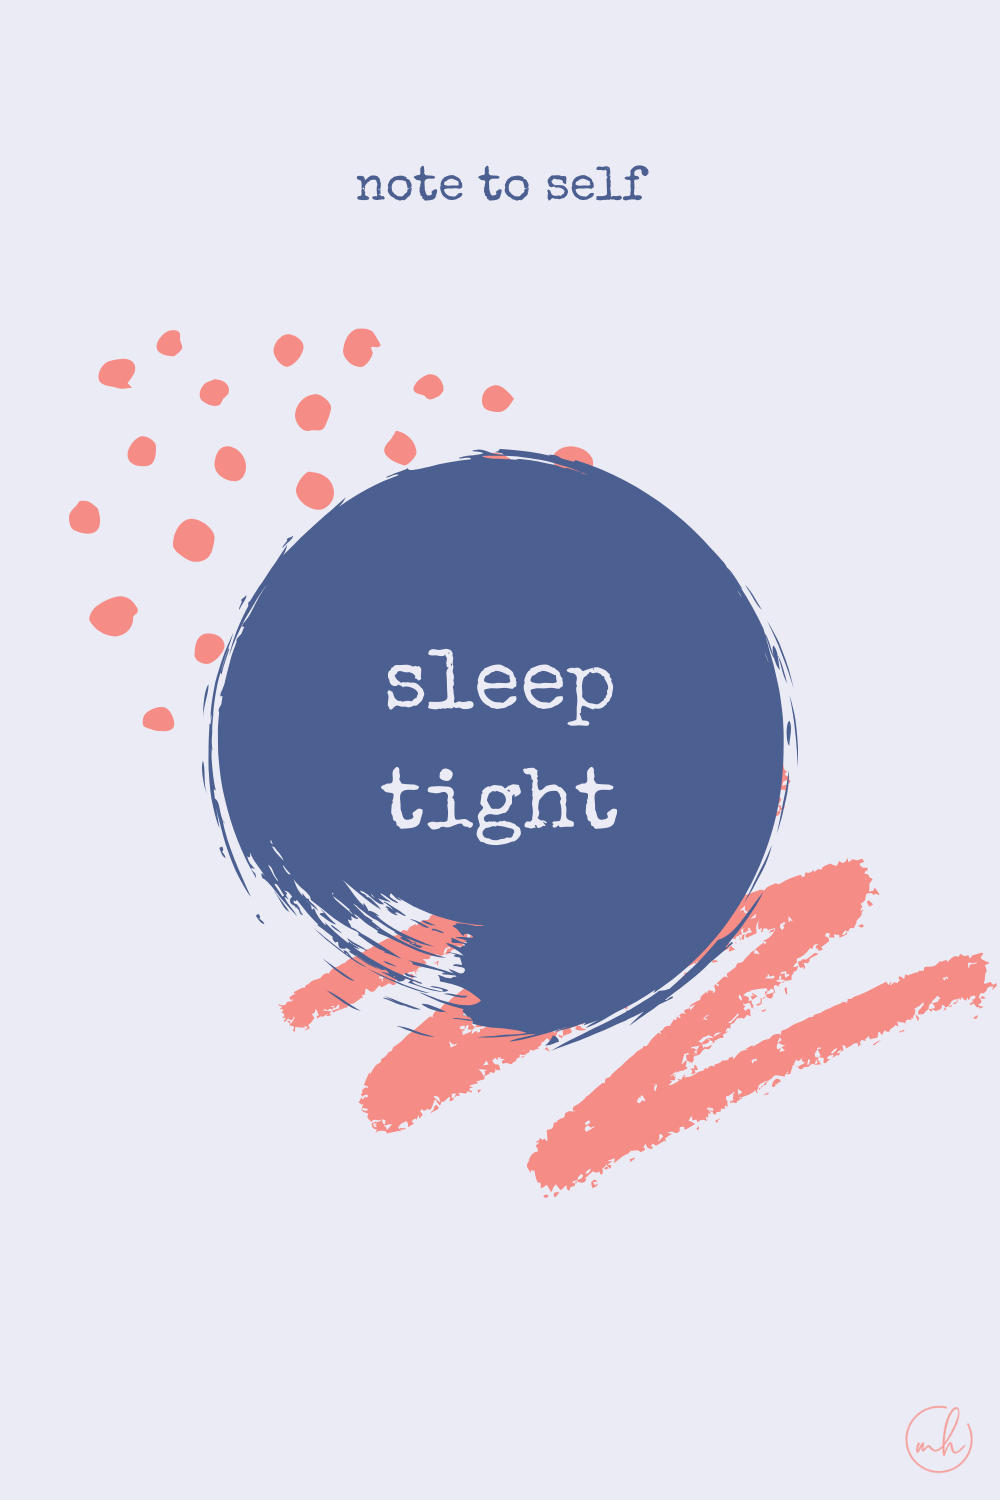 Sleep tight - Note to self quotes | myhoogah